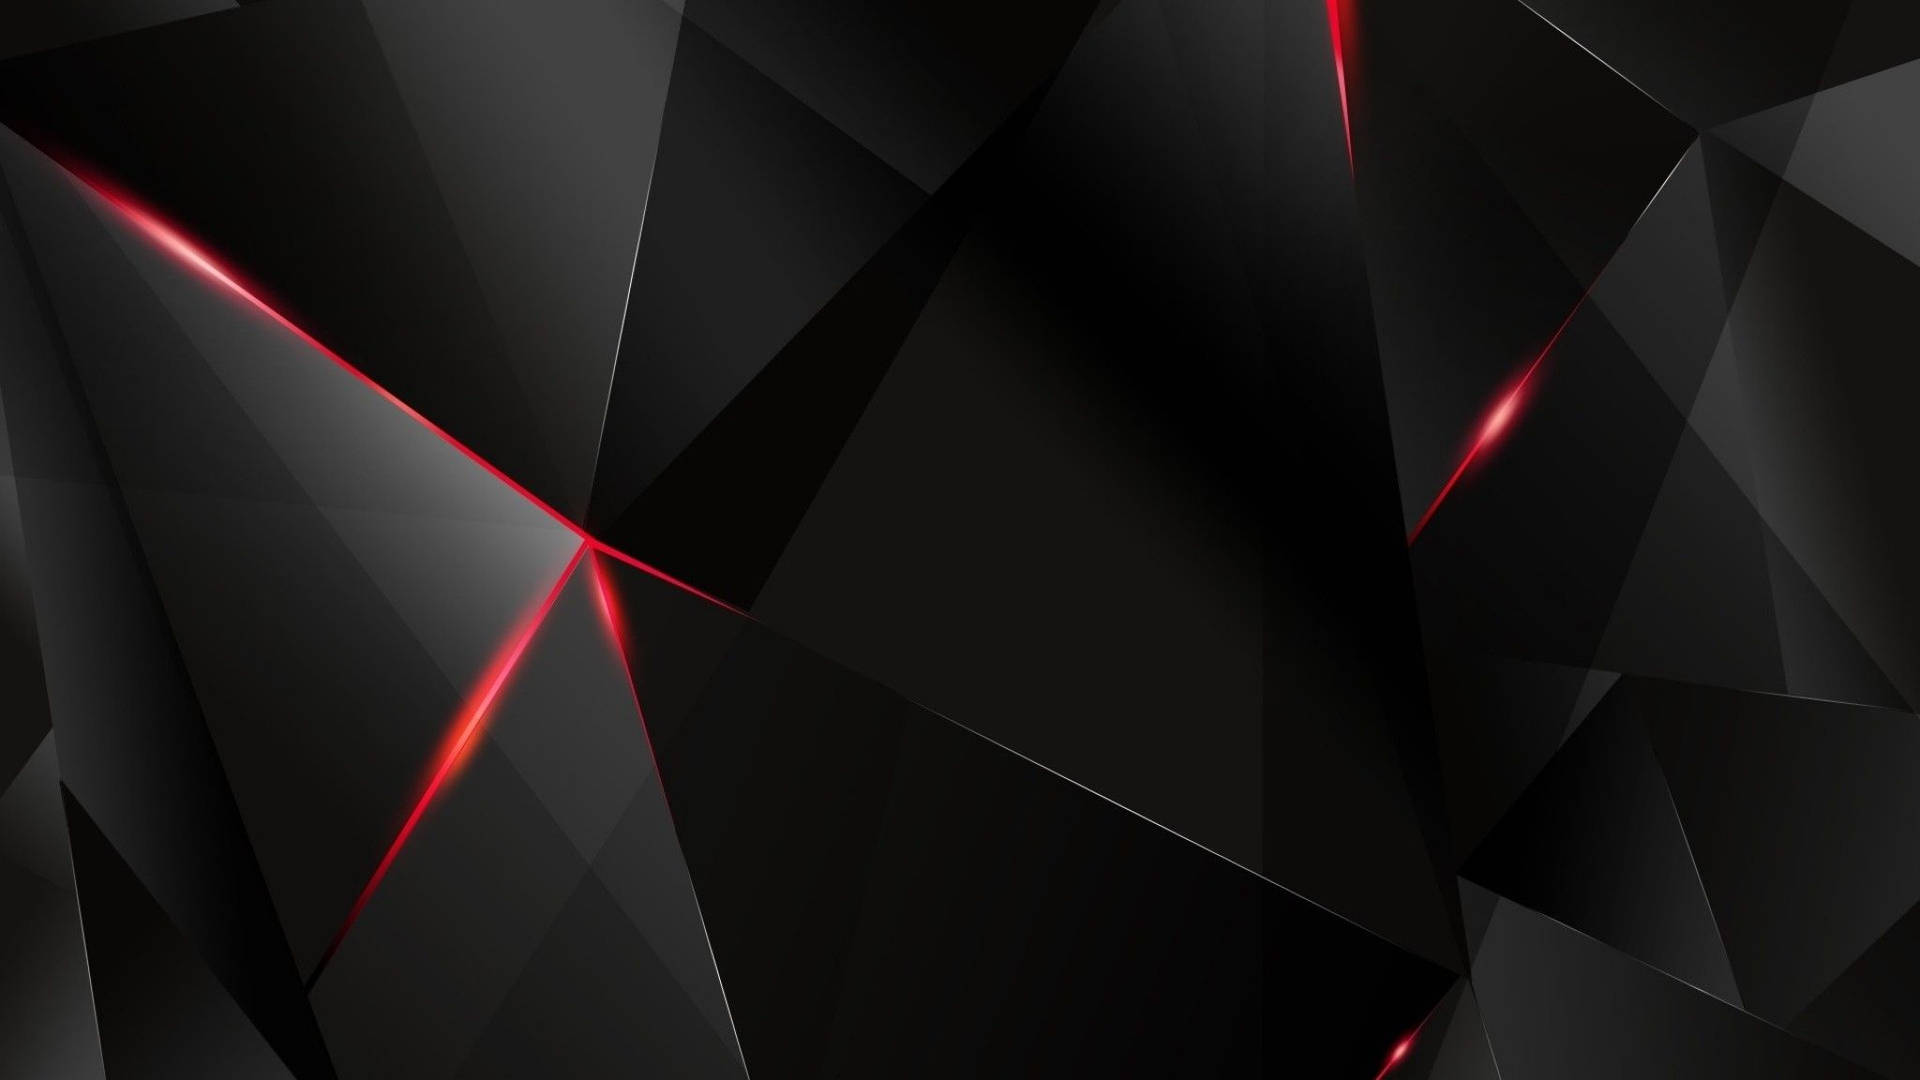 Black And Red Geometric Picture